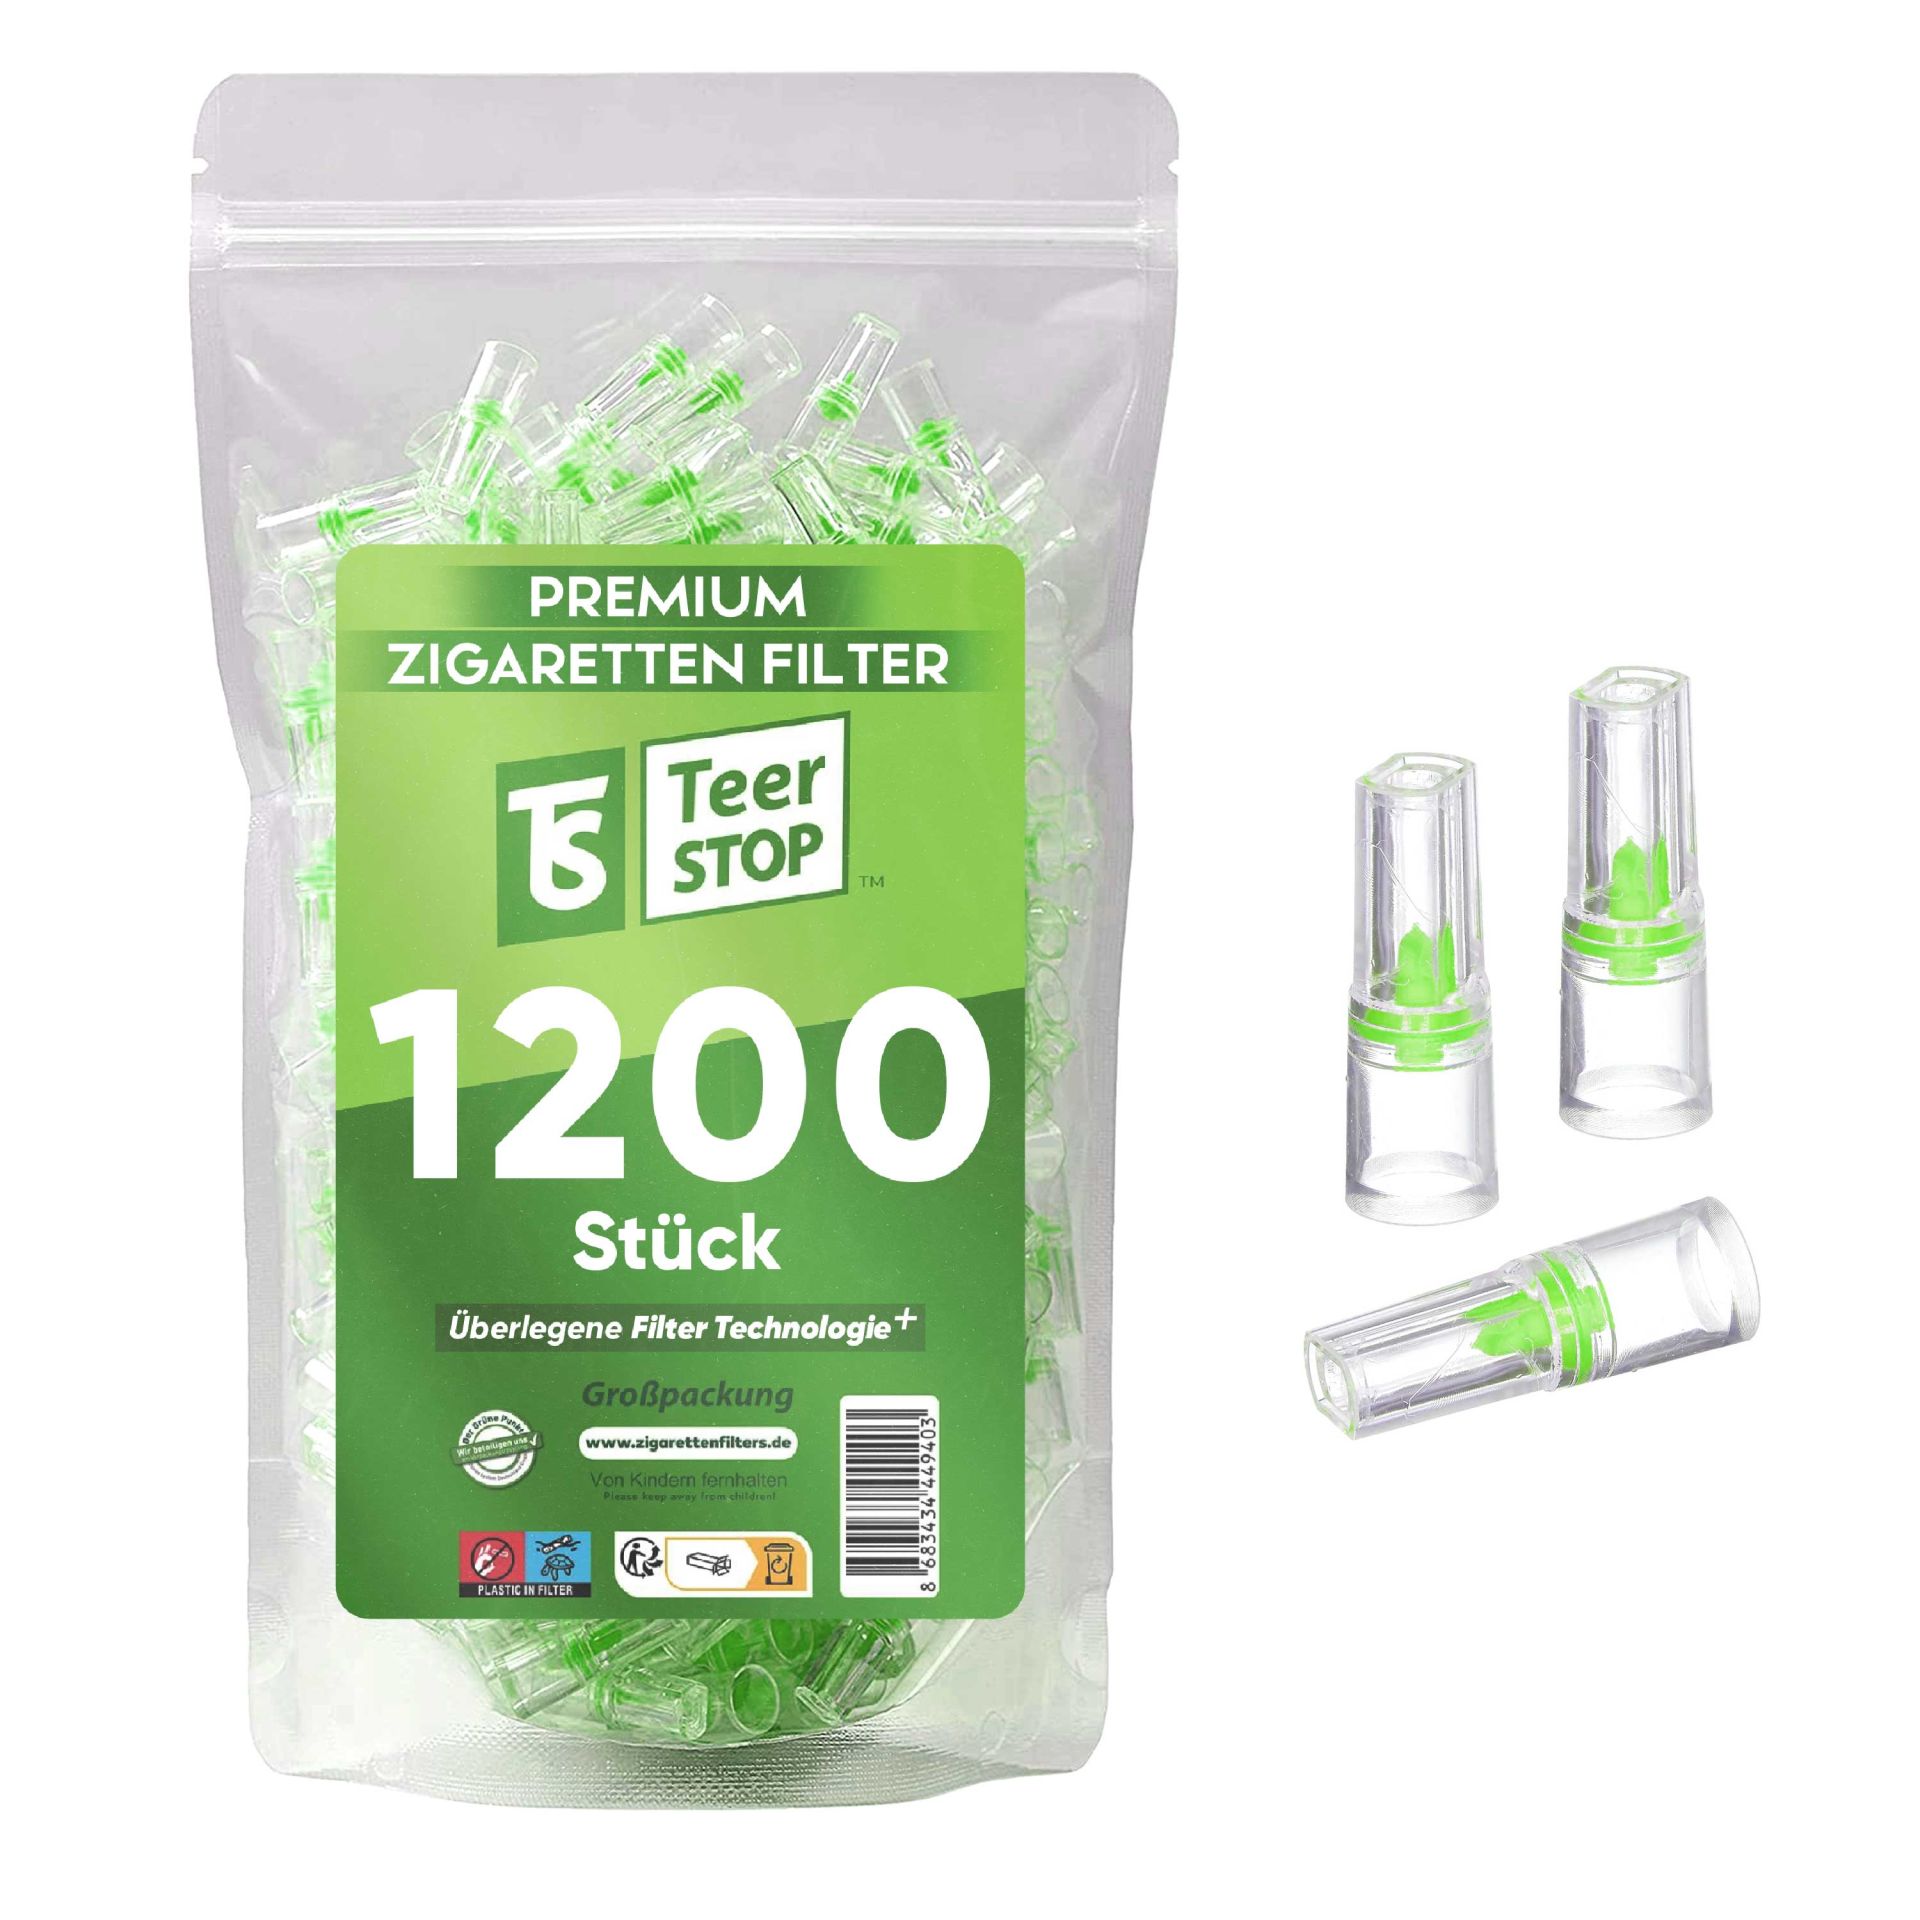 TS Teer STOP Premium Disposable Cigarette Filters for Smokers (1.200 Pieces)